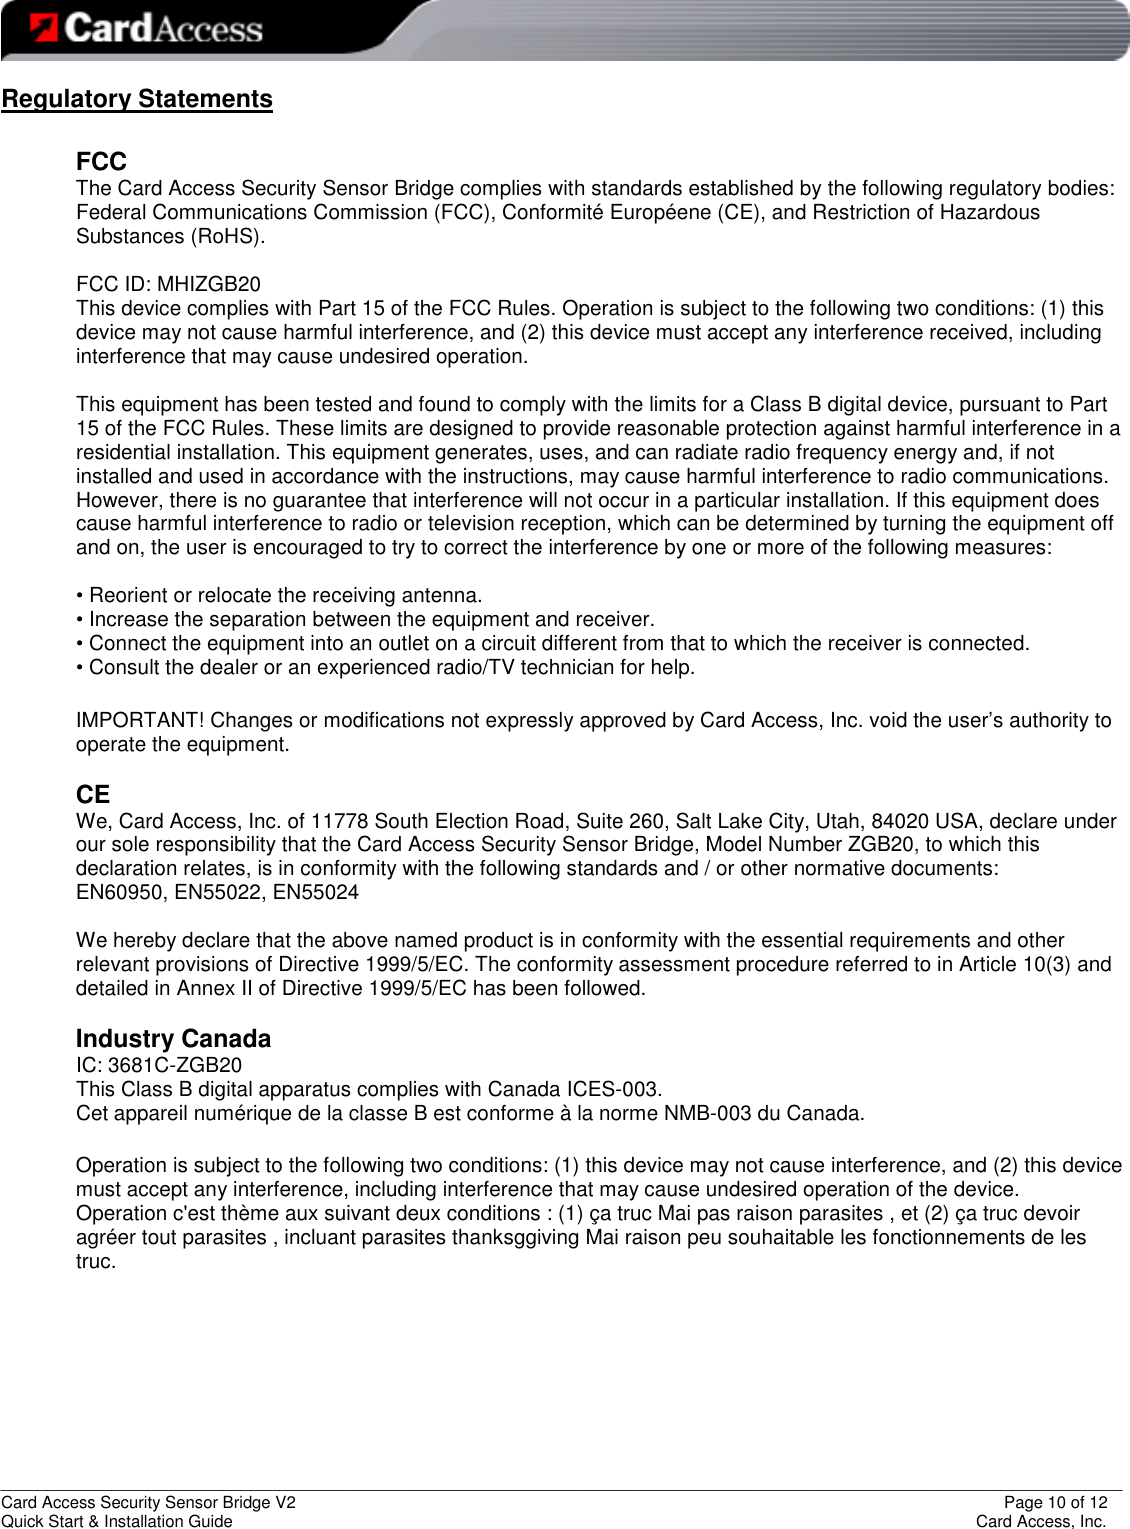   _________________________________________________________________________________________________________________________ Card Access Security Sensor Bridge V2                  Page 10 of 12 Quick Start &amp; Installation Guide      Card Access, Inc. Regulatory Statements  FCC The Card Access Security Sensor Bridge complies with standards established by the following regulatory bodies: Federal Communications Commission (FCC), Conformité Européene (CE), and Restriction of Hazardous Substances (RoHS).  FCC ID: MHIZGB20 This device complies with Part 15 of the FCC Rules. Operation is subject to the following two conditions: (1) this device may not cause harmful interference, and (2) this device must accept any interference received, including interference that may cause undesired operation.  This equipment has been tested and found to comply with the limits for a Class B digital device, pursuant to Part 15 of the FCC Rules. These limits are designed to provide reasonable protection against harmful interference in a residential installation. This equipment generates, uses, and can radiate radio frequency energy and, if not installed and used in accordance with the instructions, may cause harmful interference to radio communications. However, there is no guarantee that interference will not occur in a particular installation. If this equipment does cause harmful interference to radio or television reception, which can be determined by turning the equipment off and on, the user is encouraged to try to correct the interference by one or more of the following measures:  • Reorient or relocate the receiving antenna. • Increase the separation between the equipment and receiver. • Connect the equipment into an outlet on a circuit different from that to which the receiver is connected. • Consult the dealer or an experienced radio/TV technician for help.  IMPORTANT! Changes or modifications not expressly approved by Card Access, Inc. void the user’s authority to operate the equipment.  CE We, Card Access, Inc. of 11778 South Election Road, Suite 260, Salt Lake City, Utah, 84020 USA, declare under our sole responsibility that the Card Access Security Sensor Bridge, Model Number ZGB20, to which this declaration relates, is in conformity with the following standards and / or other normative documents:  EN60950, EN55022, EN55024  We hereby declare that the above named product is in conformity with the essential requirements and other relevant provisions of Directive 1999/5/EC. The conformity assessment procedure referred to in Article 10(3) and detailed in Annex II of Directive 1999/5/EC has been followed.  Industry Canada IC: 3681C-ZGB20 This Class B digital apparatus complies with Canada ICES-003. Cet appareil numérique de la classe B est conforme à la norme NMB-003 du Canada.  Operation is subject to the following two conditions: (1) this device may not cause interference, and (2) this device must accept any interference, including interference that may cause undesired operation of the device. Operation c&apos;est thème aux suivant deux conditions : (1) ça truc Mai pas raison parasites , et (2) ça truc devoir agréer tout parasites , incluant parasites thanksggiving Mai raison peu souhaitable les fonctionnements de les truc.      